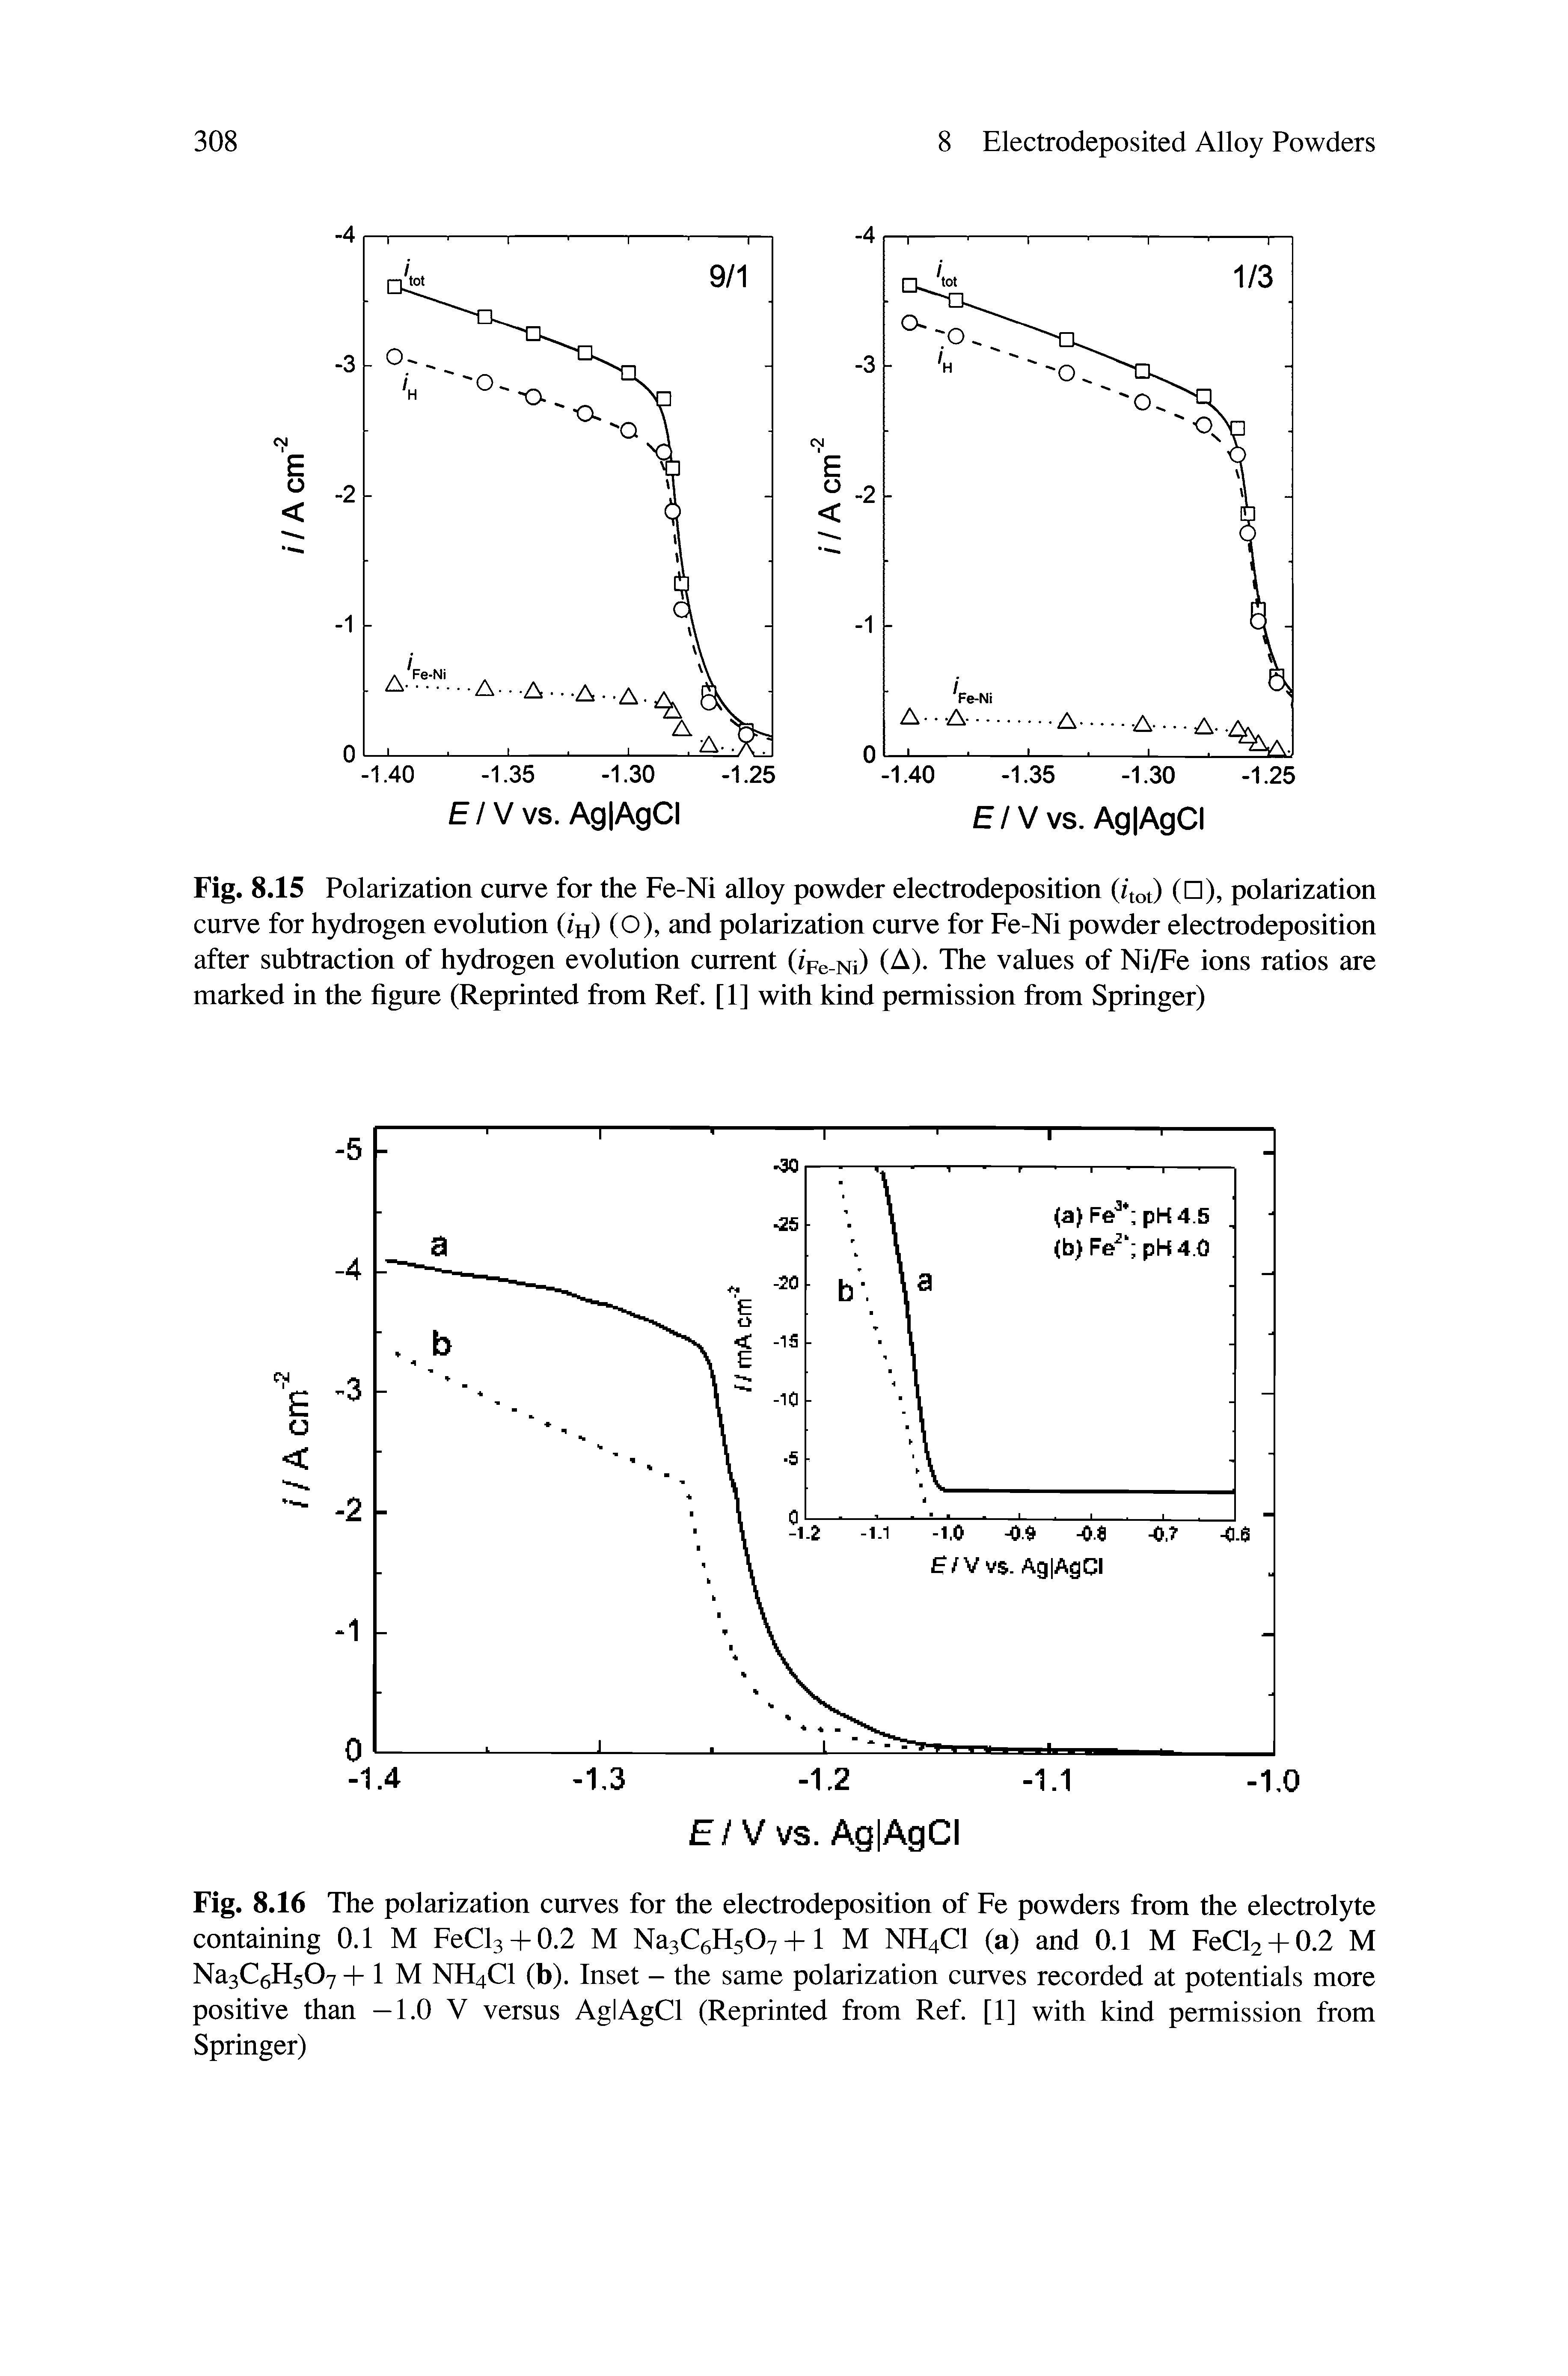 Fig. 8.15 Polarization curve for the Fe-Ni alloy powder electrodeposition (/tot) (n), polarization curve for hydrogen evolution (/h) (O), and polarization curve for Fe-Ni powder electrodeposition after subtraction of hydrogen evolution current (/pe-Ni) ( )- The values of Ni/Fe ions ratios are marked in the figure (Reprinted from Ref. [1] with kind permission fi-om Springer)...